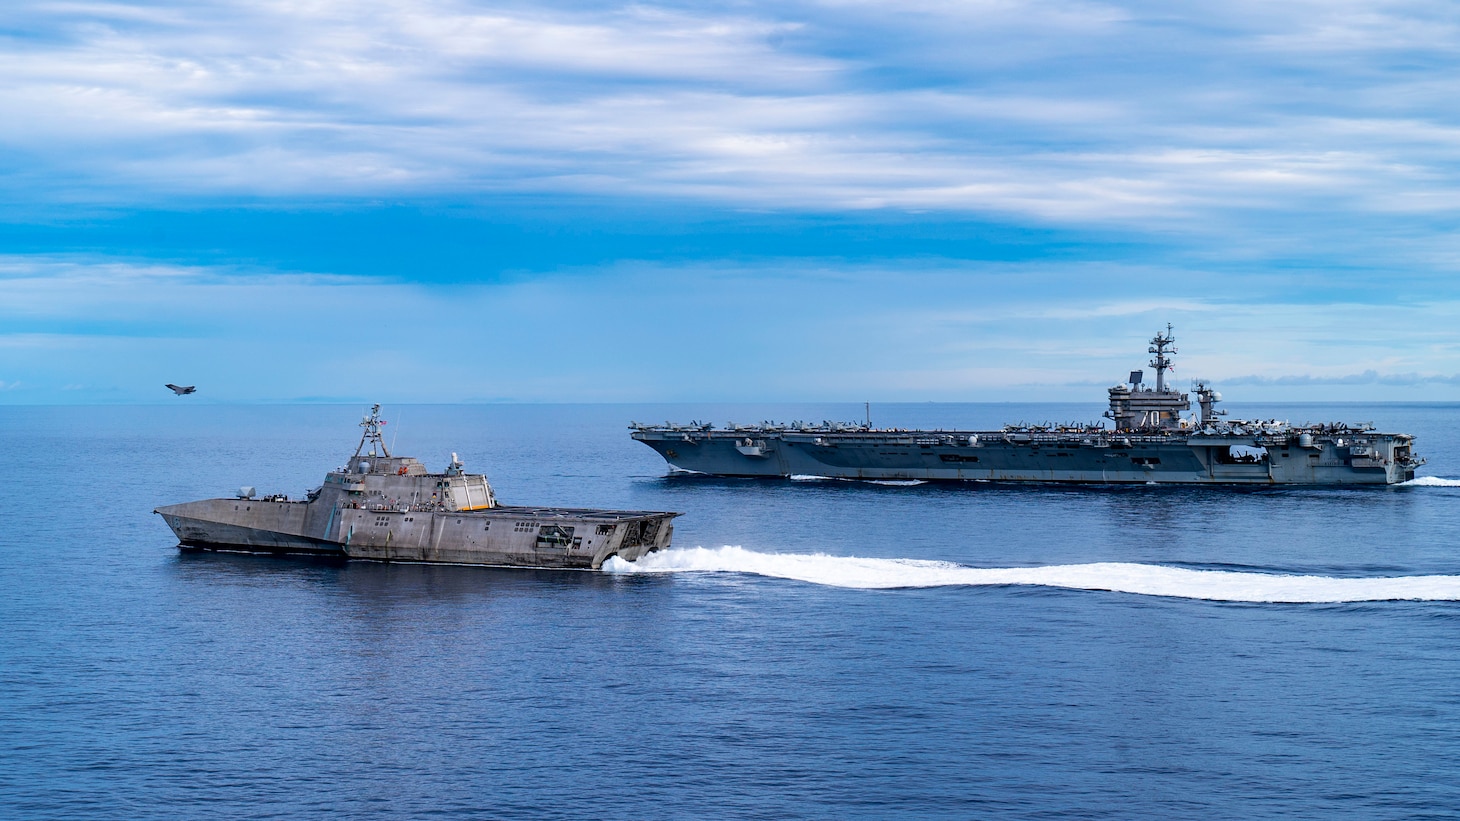 An F-35C Lightning II, assigned to the “Argonauts” of Strike Fighter Squadron (VFA) 147, launches from the flight deck of Nimitz-class aircraft carrier USS Carl Vinson (CVN 70) while the carrier transits the South China Sea with Independence-variant littoral combat ship USS Tulsa (LCS 16), Sept. 7, 2021. Carl Vinson Carrier Strike Group is on a scheduled deployment in the U.S. 7th Fleet area of operations to enhance interoperability with allies and partners while serving as a ready-response force in support of a free and open Indo-Pacific region.